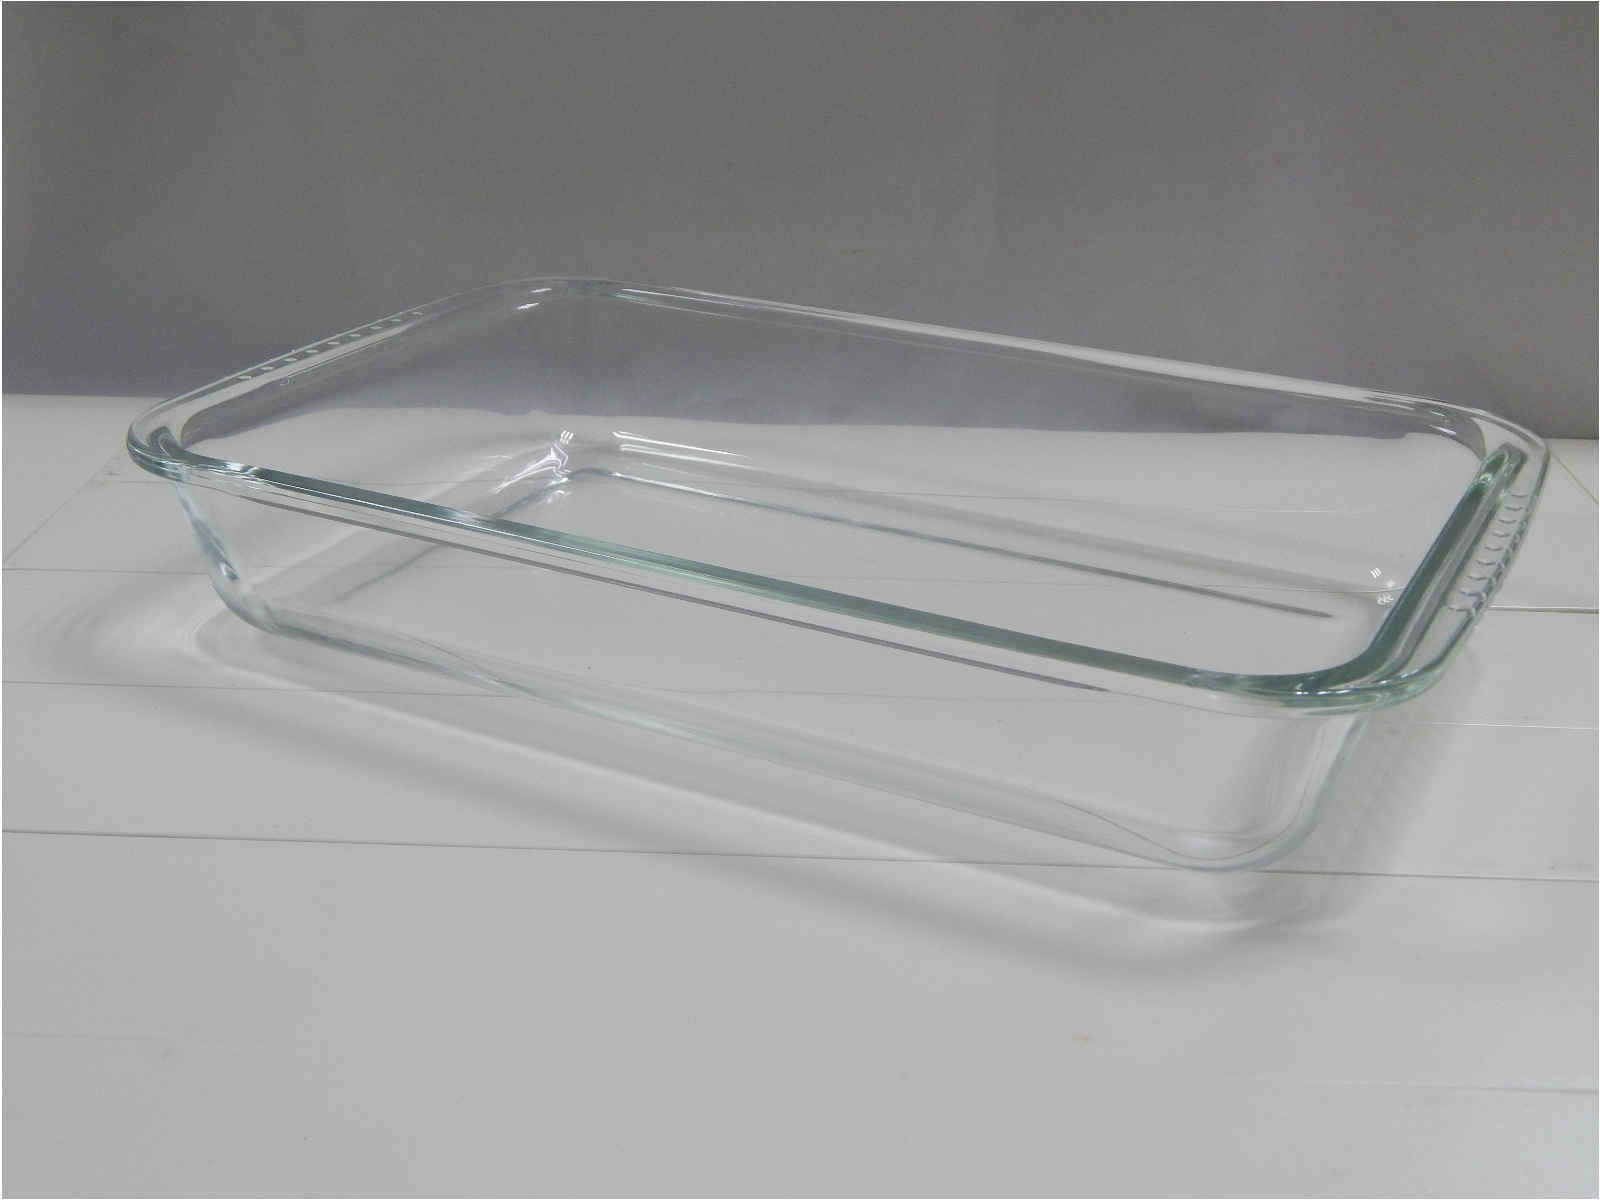 Pyrex Basics 3 Quart Glass Oblong Baking Dish with Red Plastic Lid -13.2 inch x 8.9inch x 2 inch